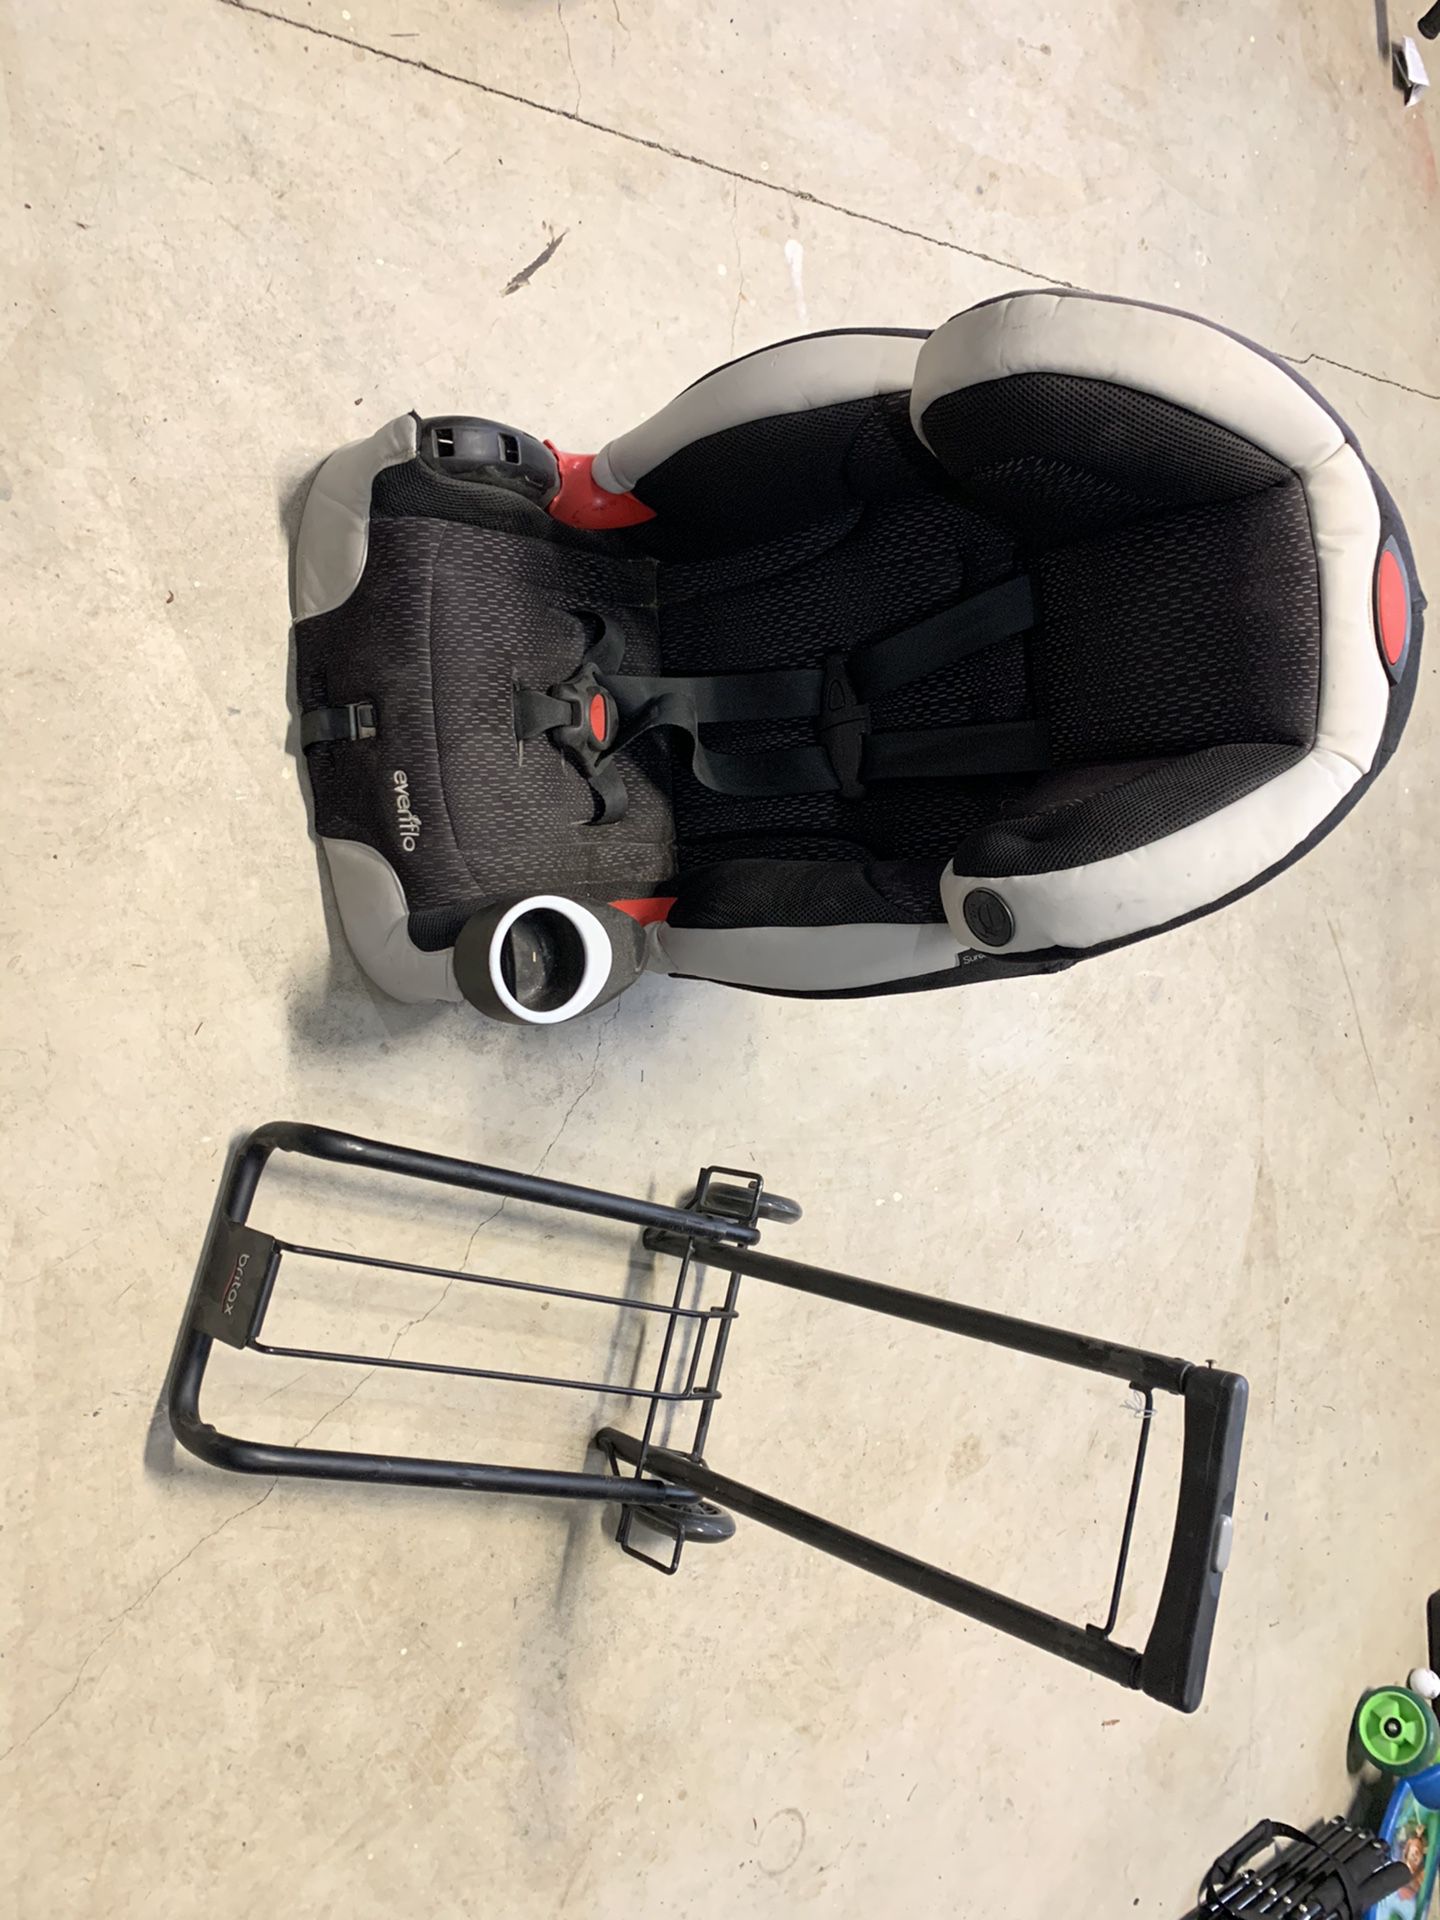 Britax car seat carrier and Evenflo car seat.